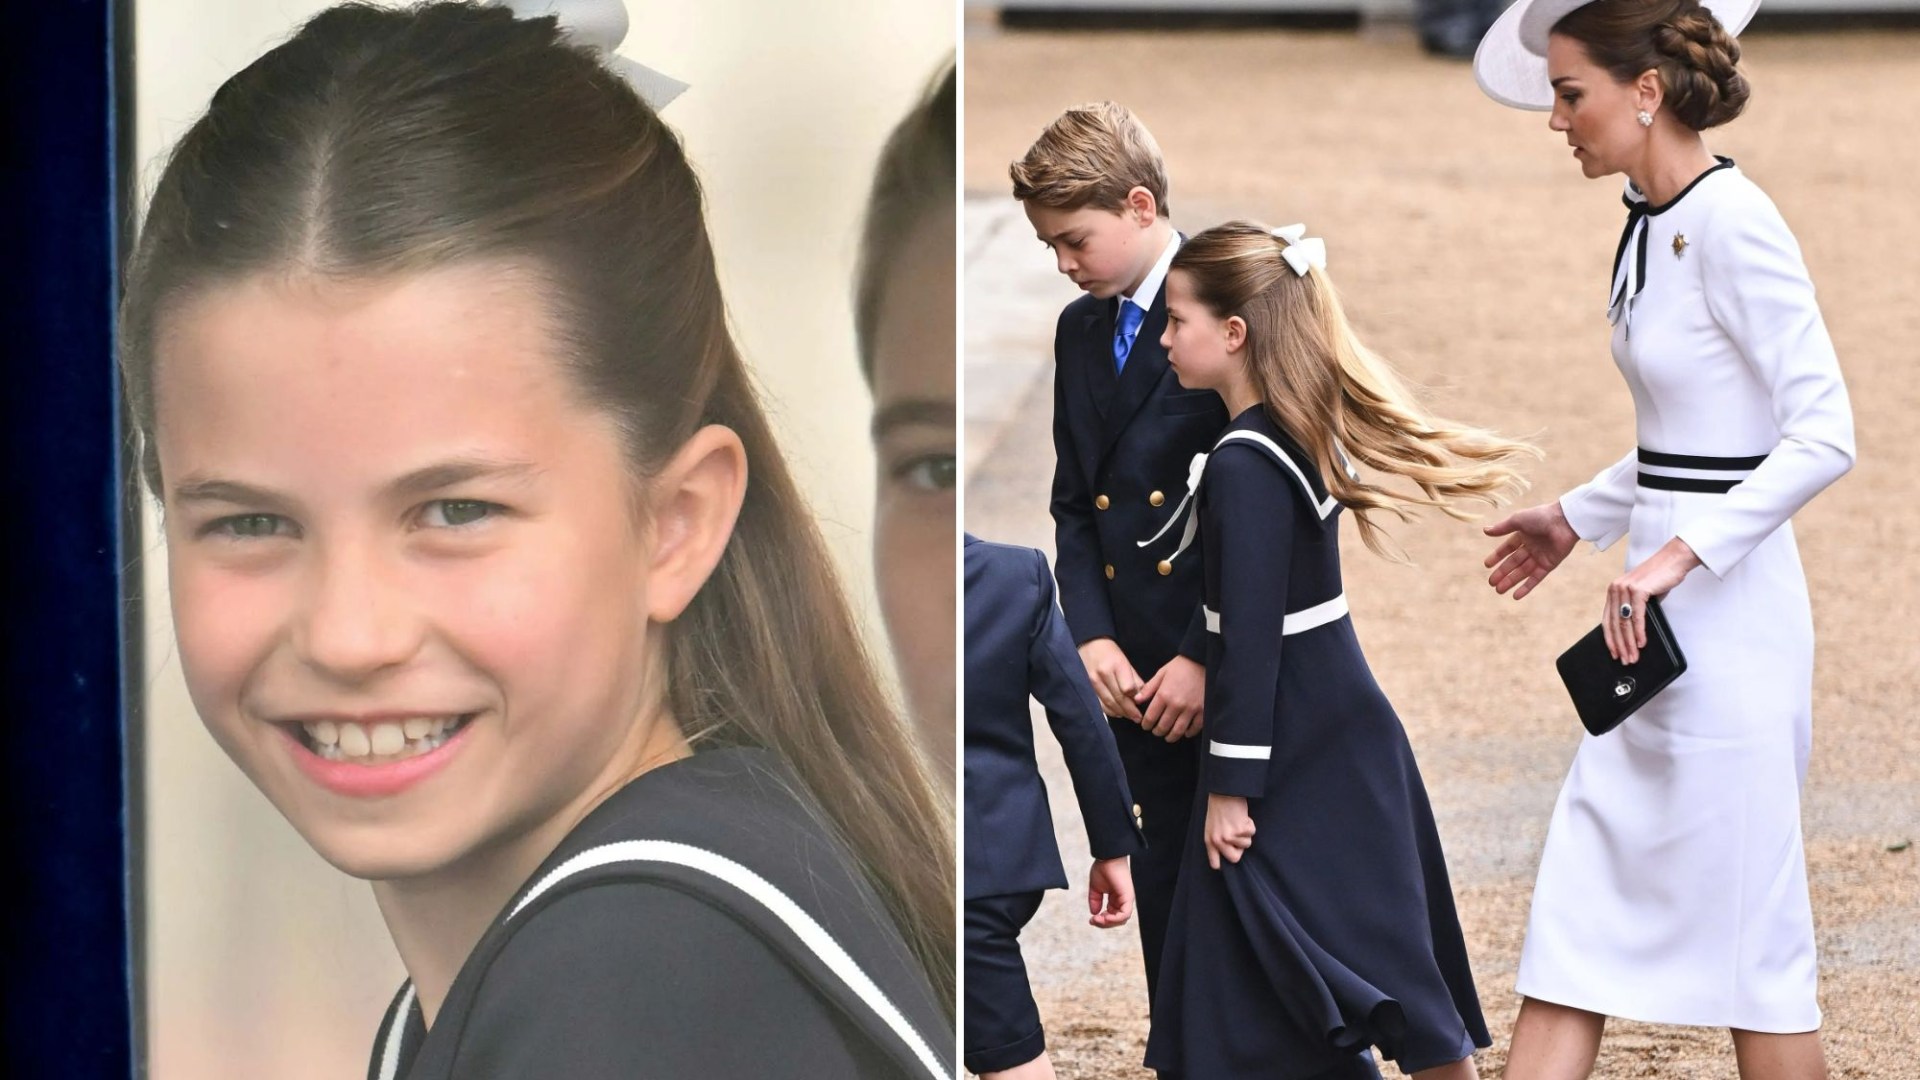 Protective Charlotte is stepping up to support Kate as her wing-woman during Trooping the Colour, says expert [Video]